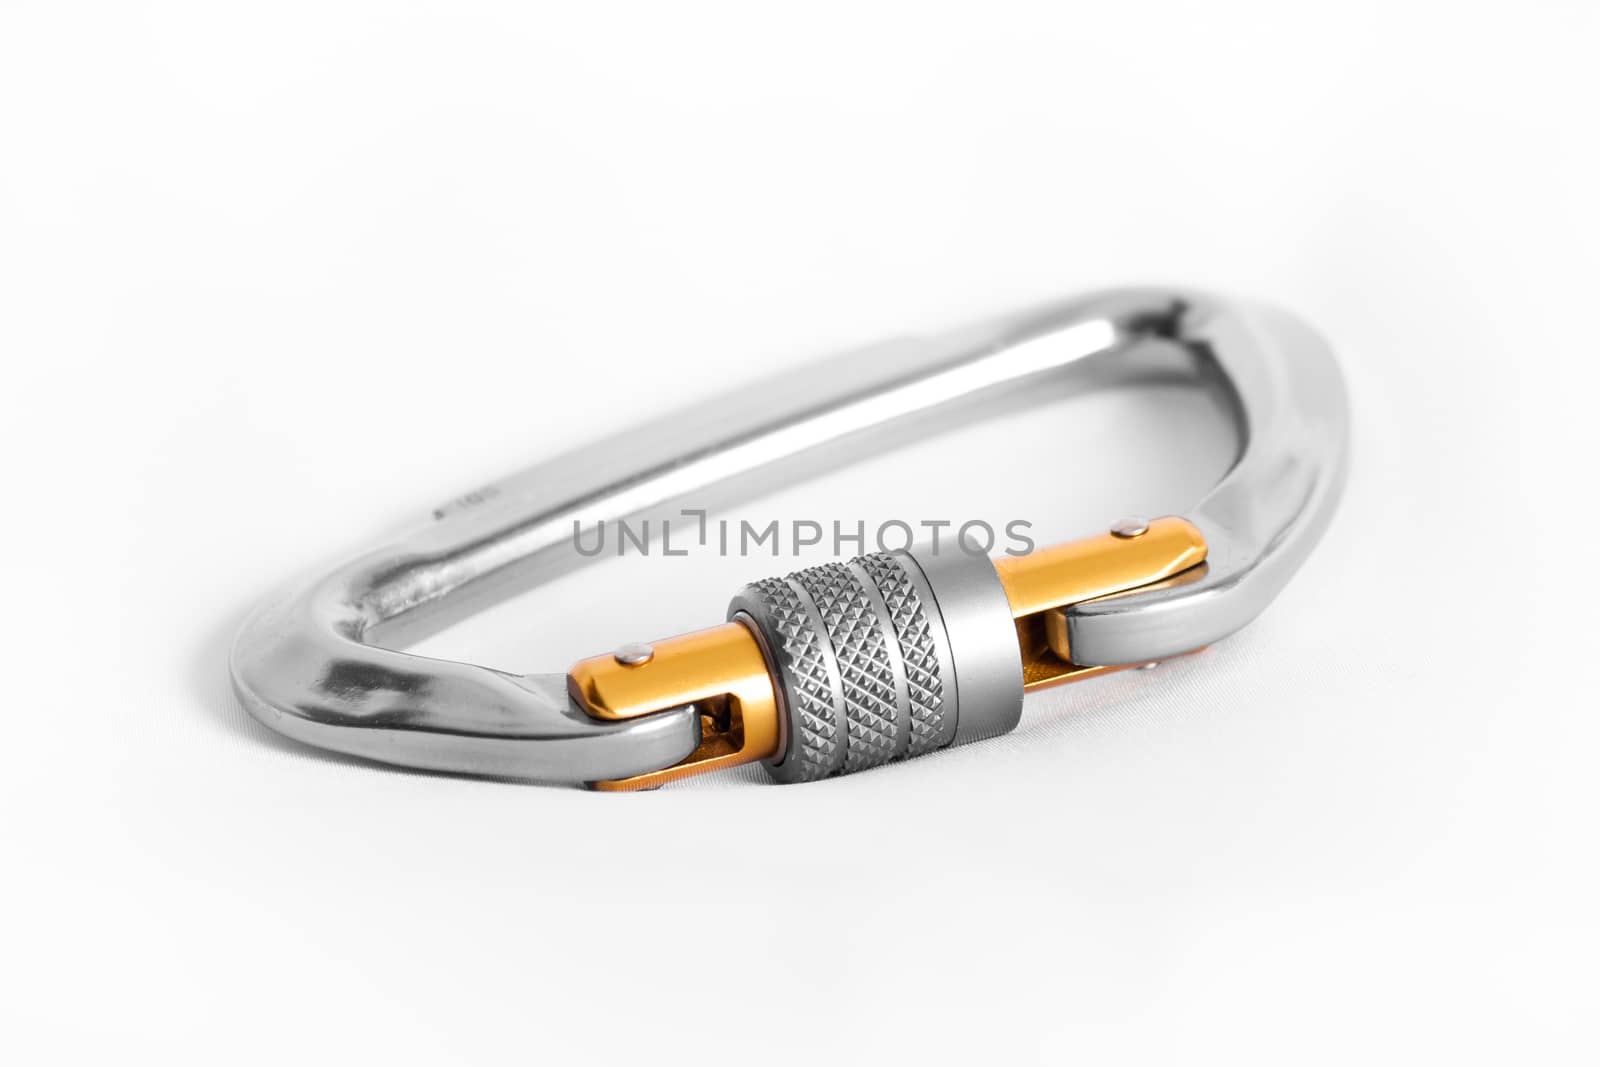 Modern climbing carabiner with lock mechanism with nice detail on the gate and lock